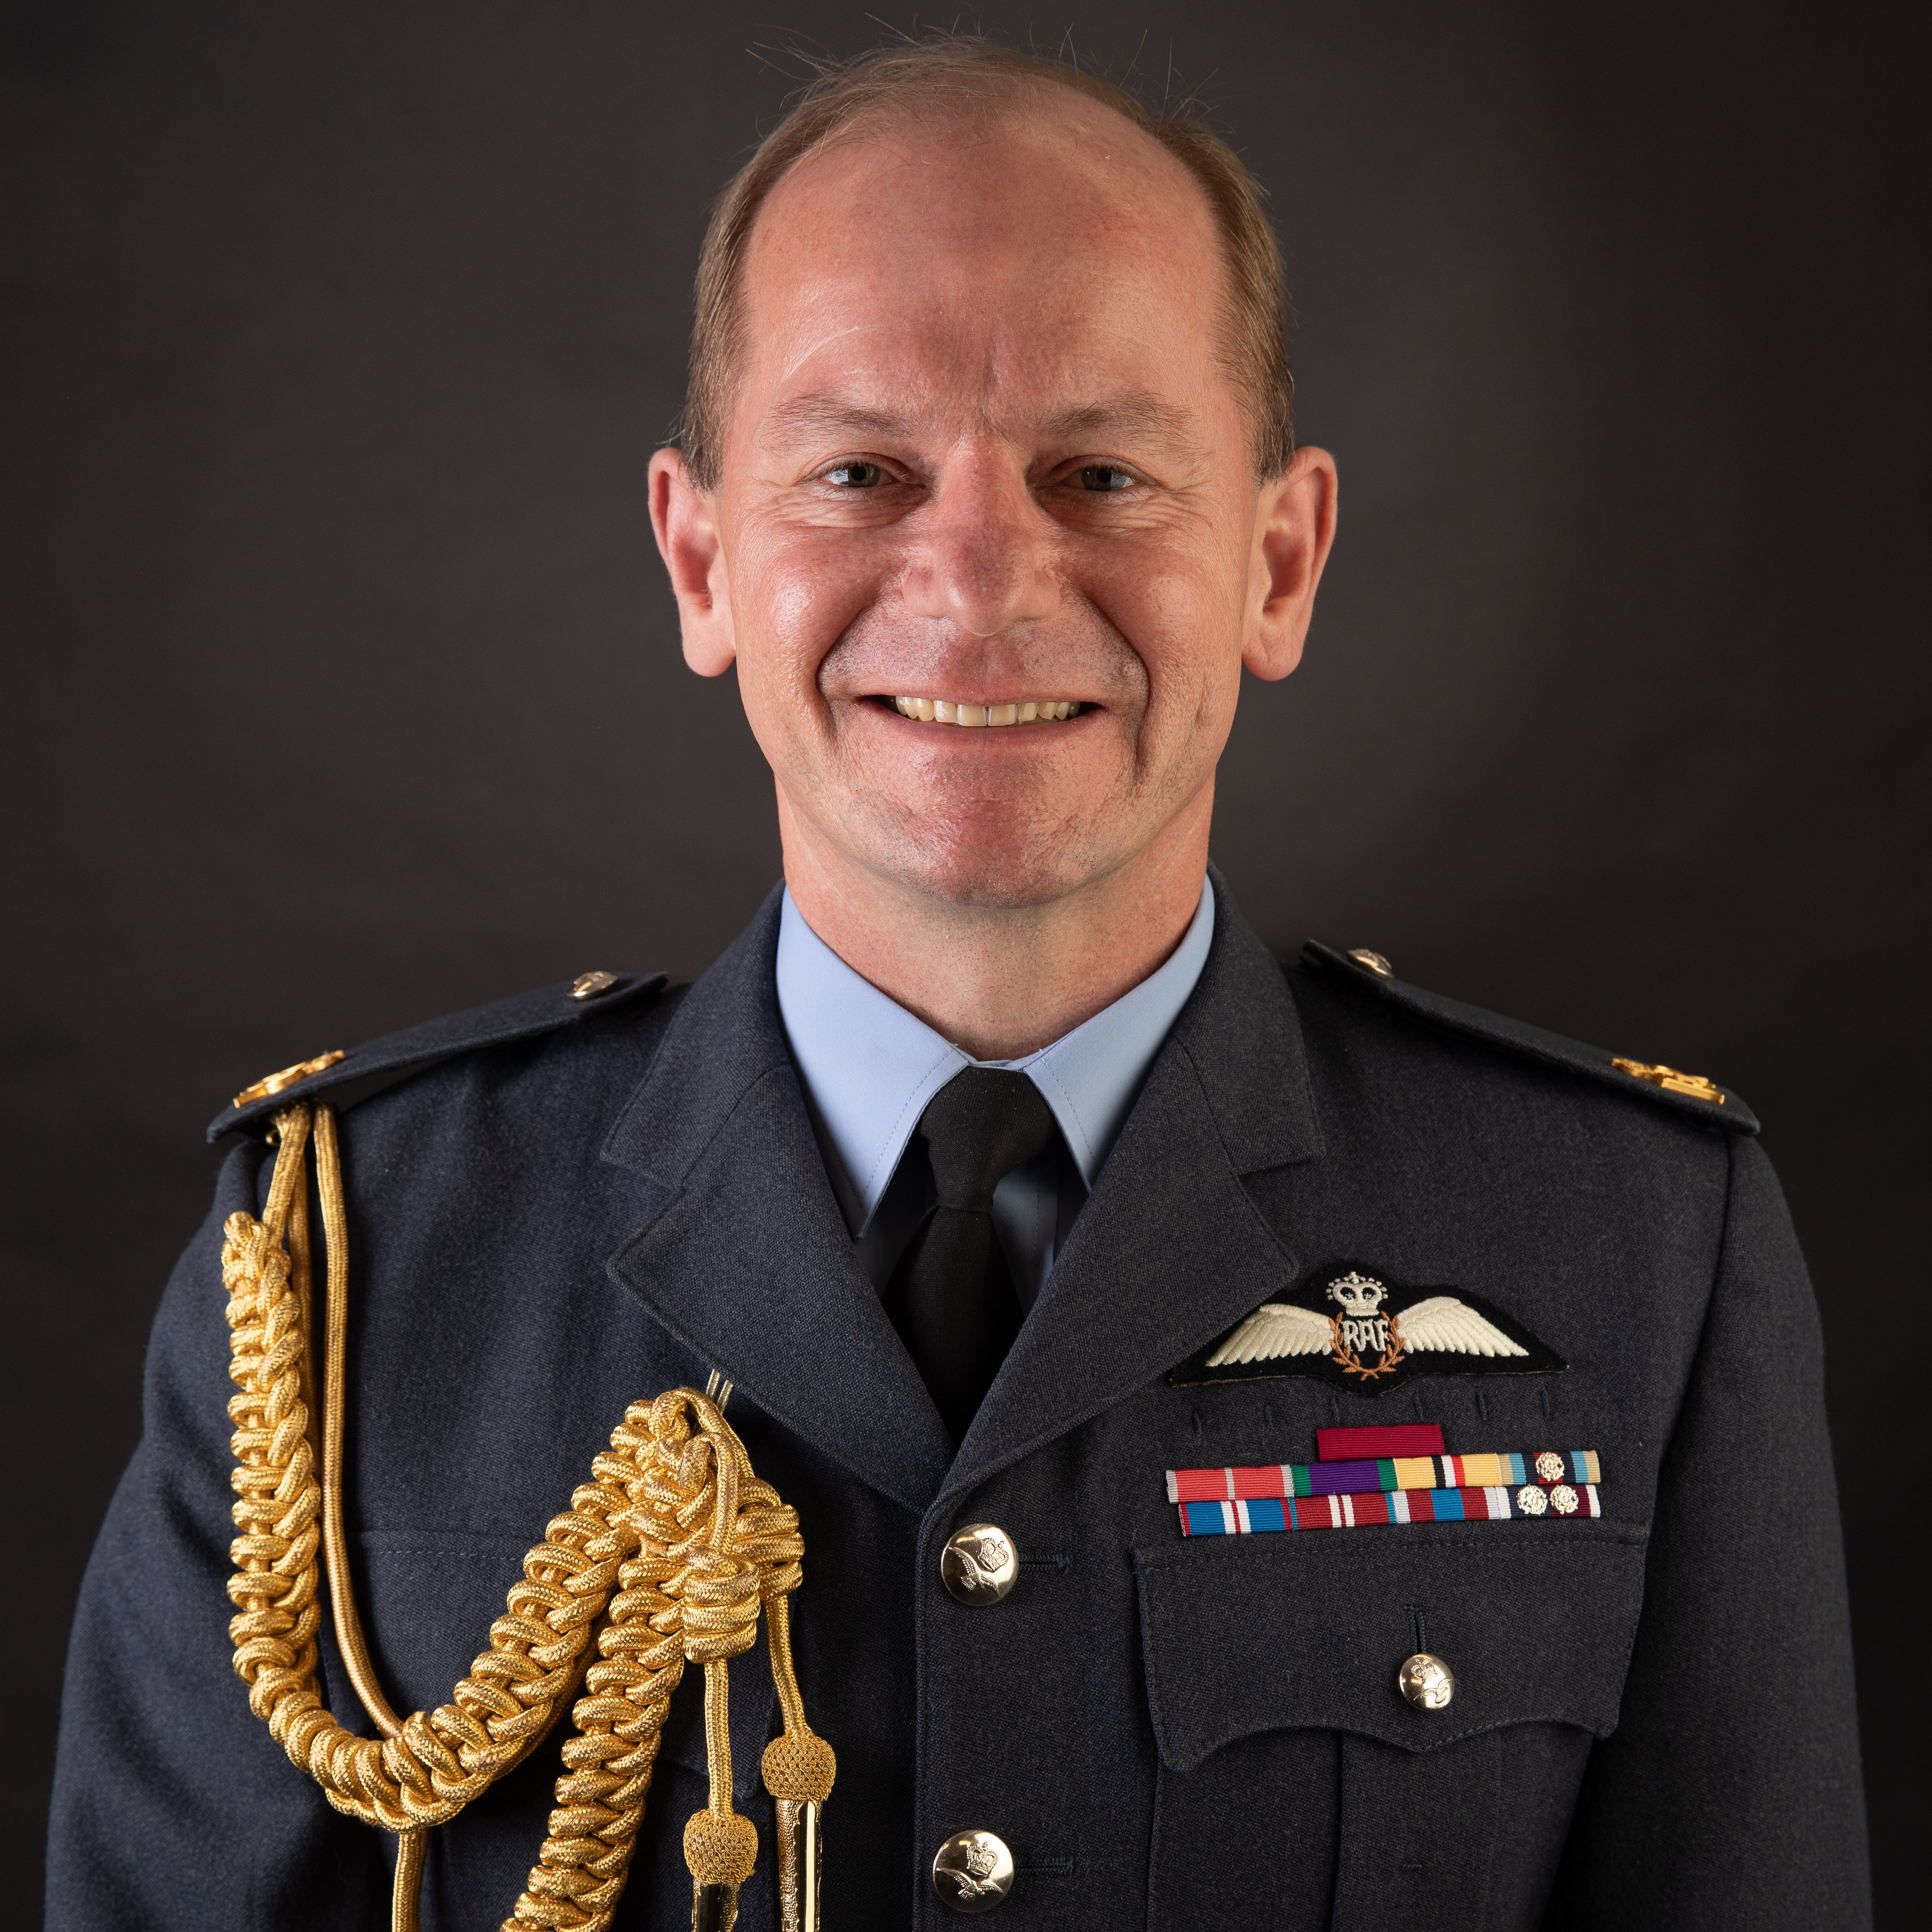 The Chief of the Air Staff, Air Chief Marshal Sir Mike Wigston.